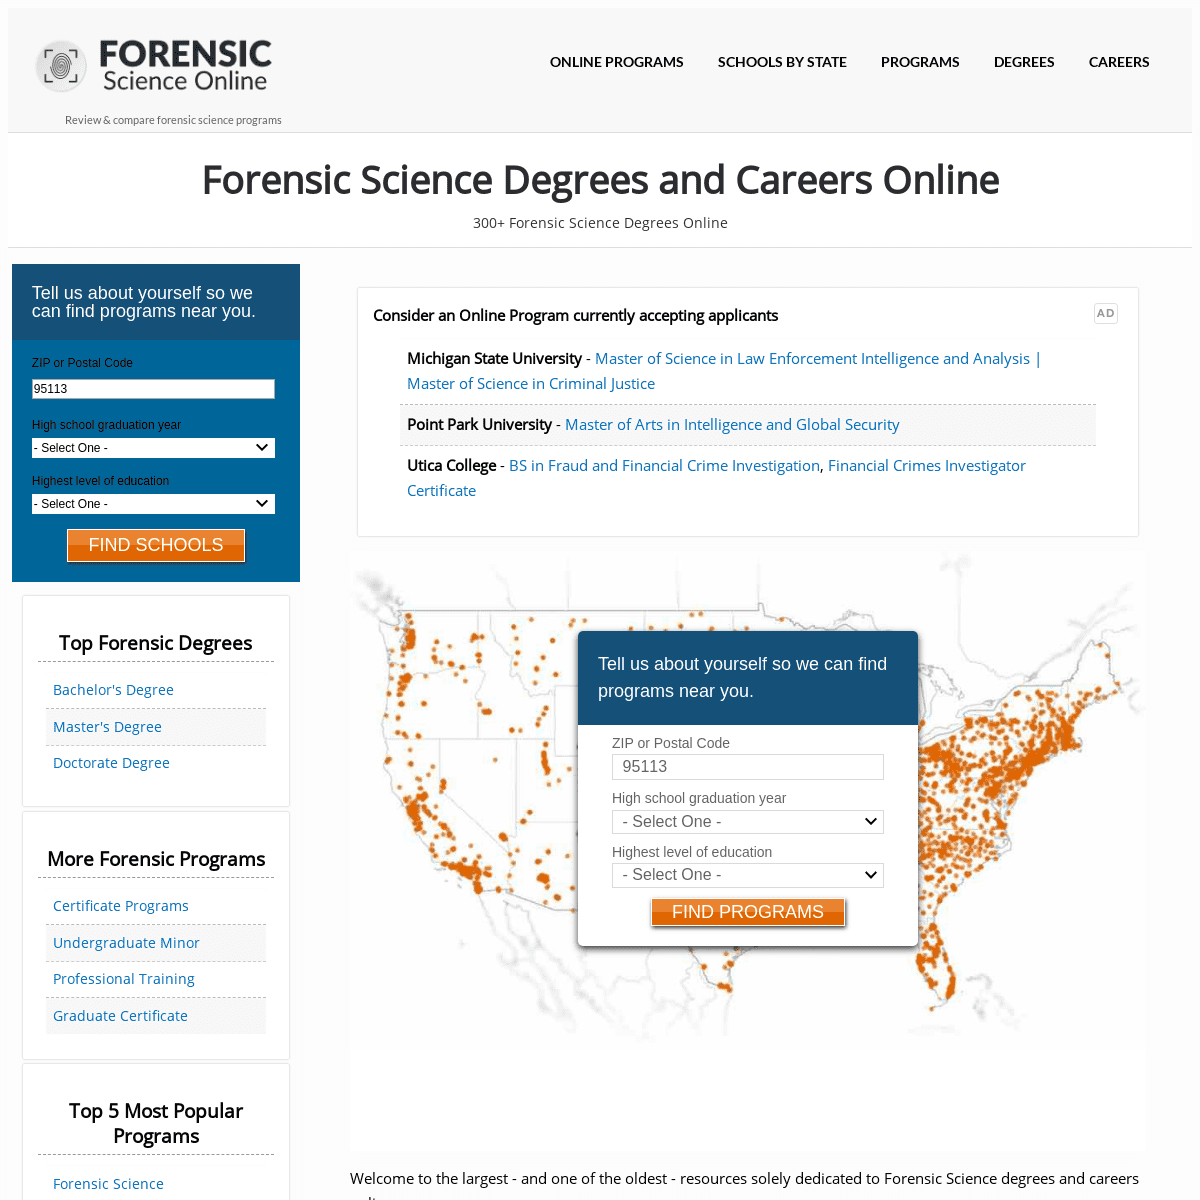 Forensic Science Degrees and Careers Online | Forensic Science Online